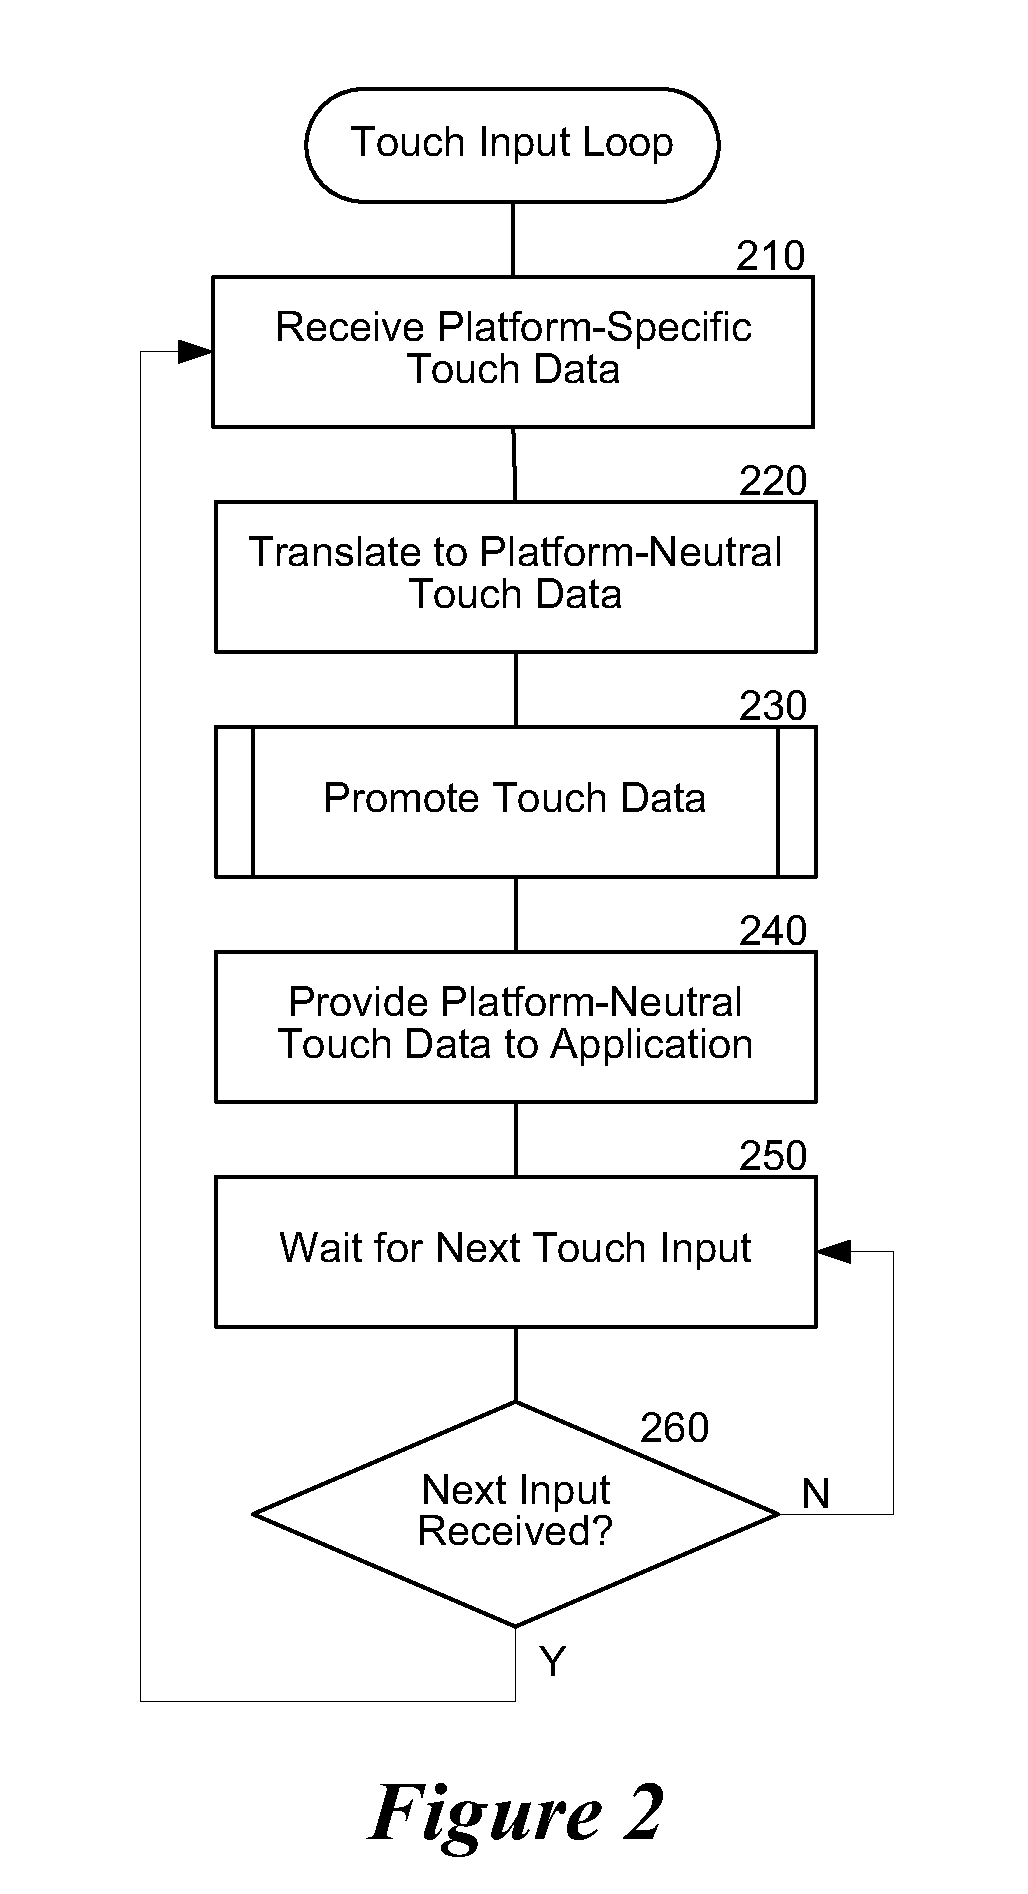 Touch input for hosted applications